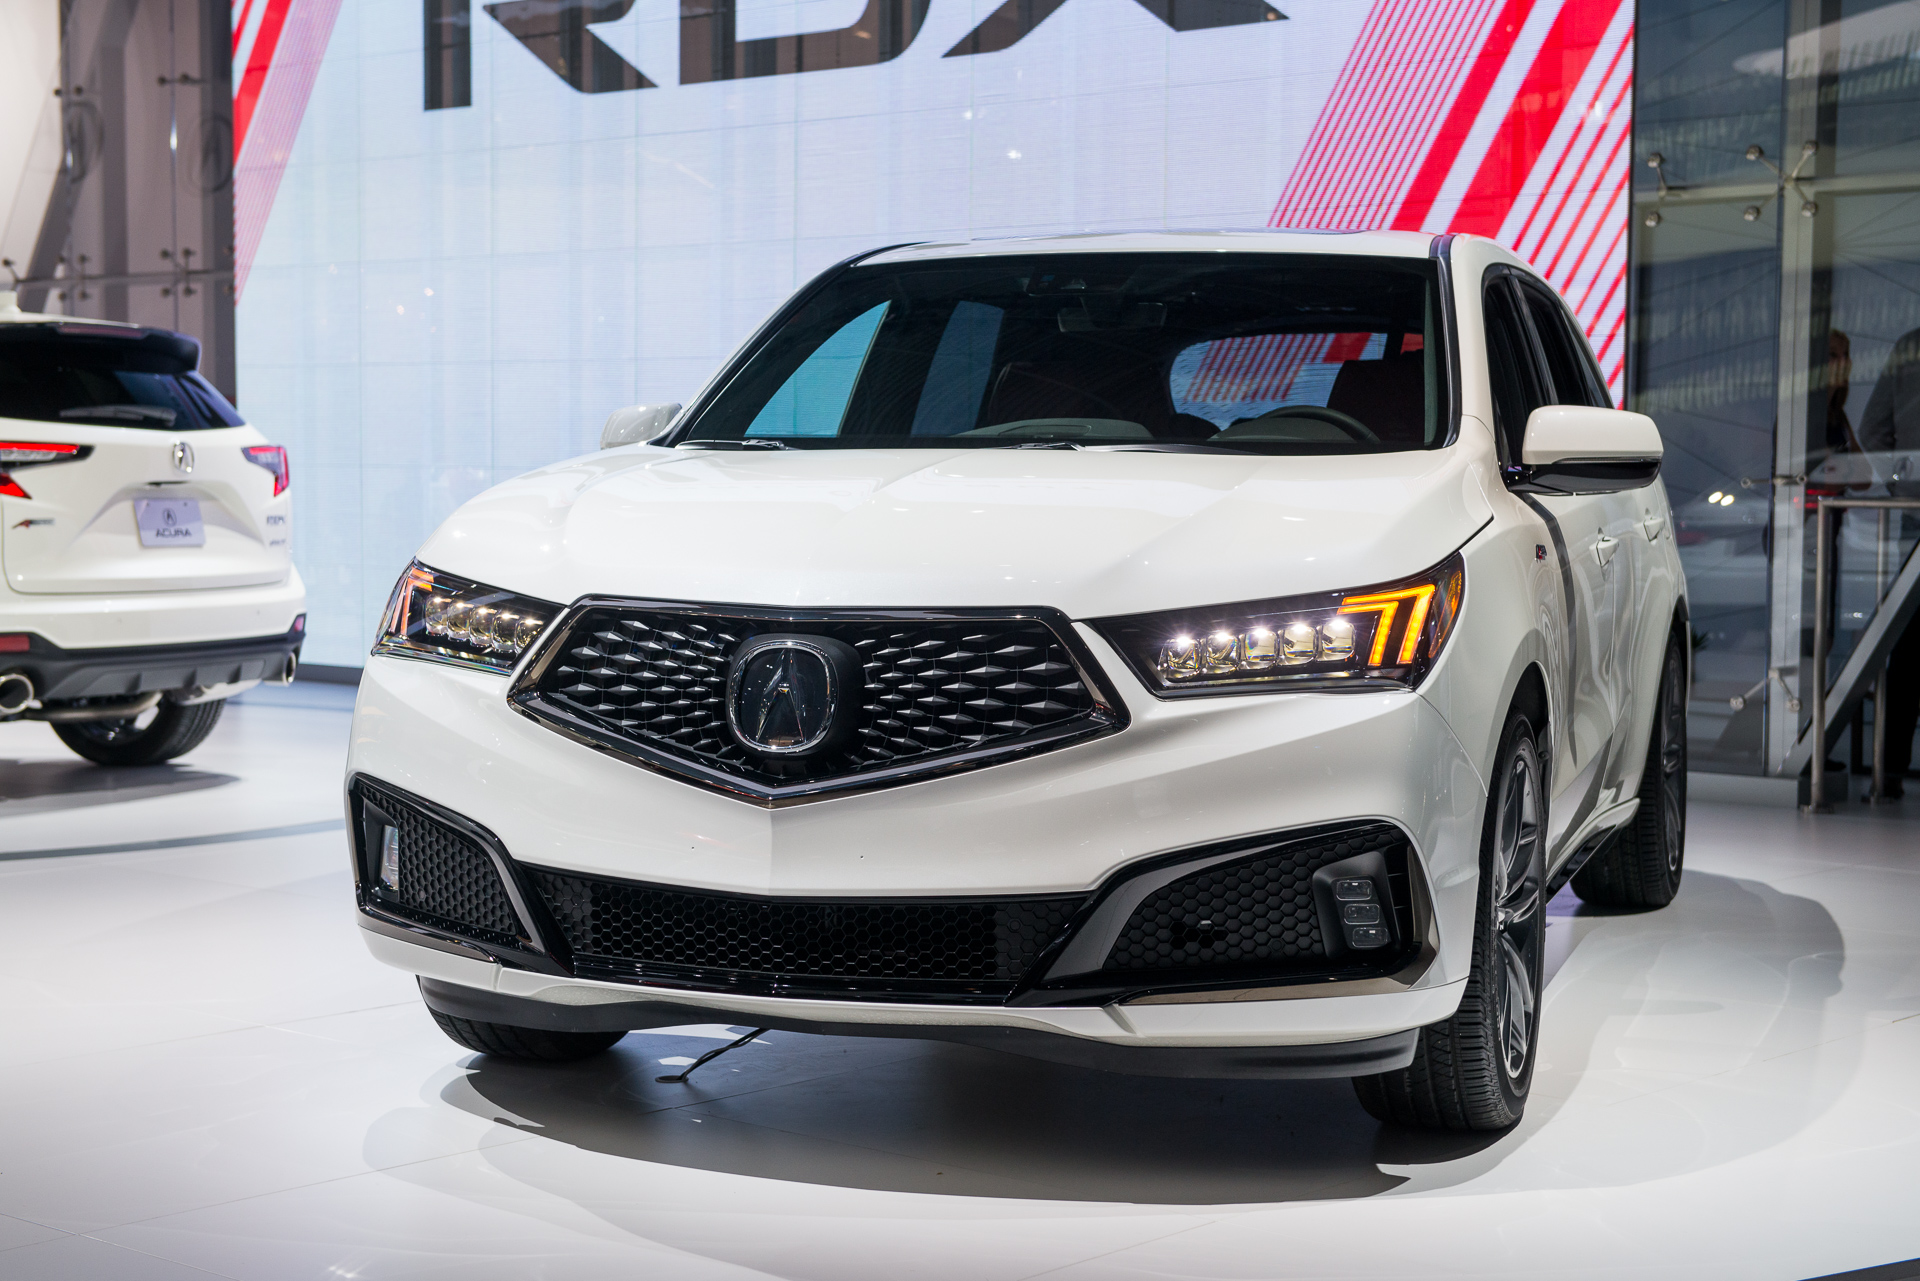 New Model Acura Mdx Coming Out